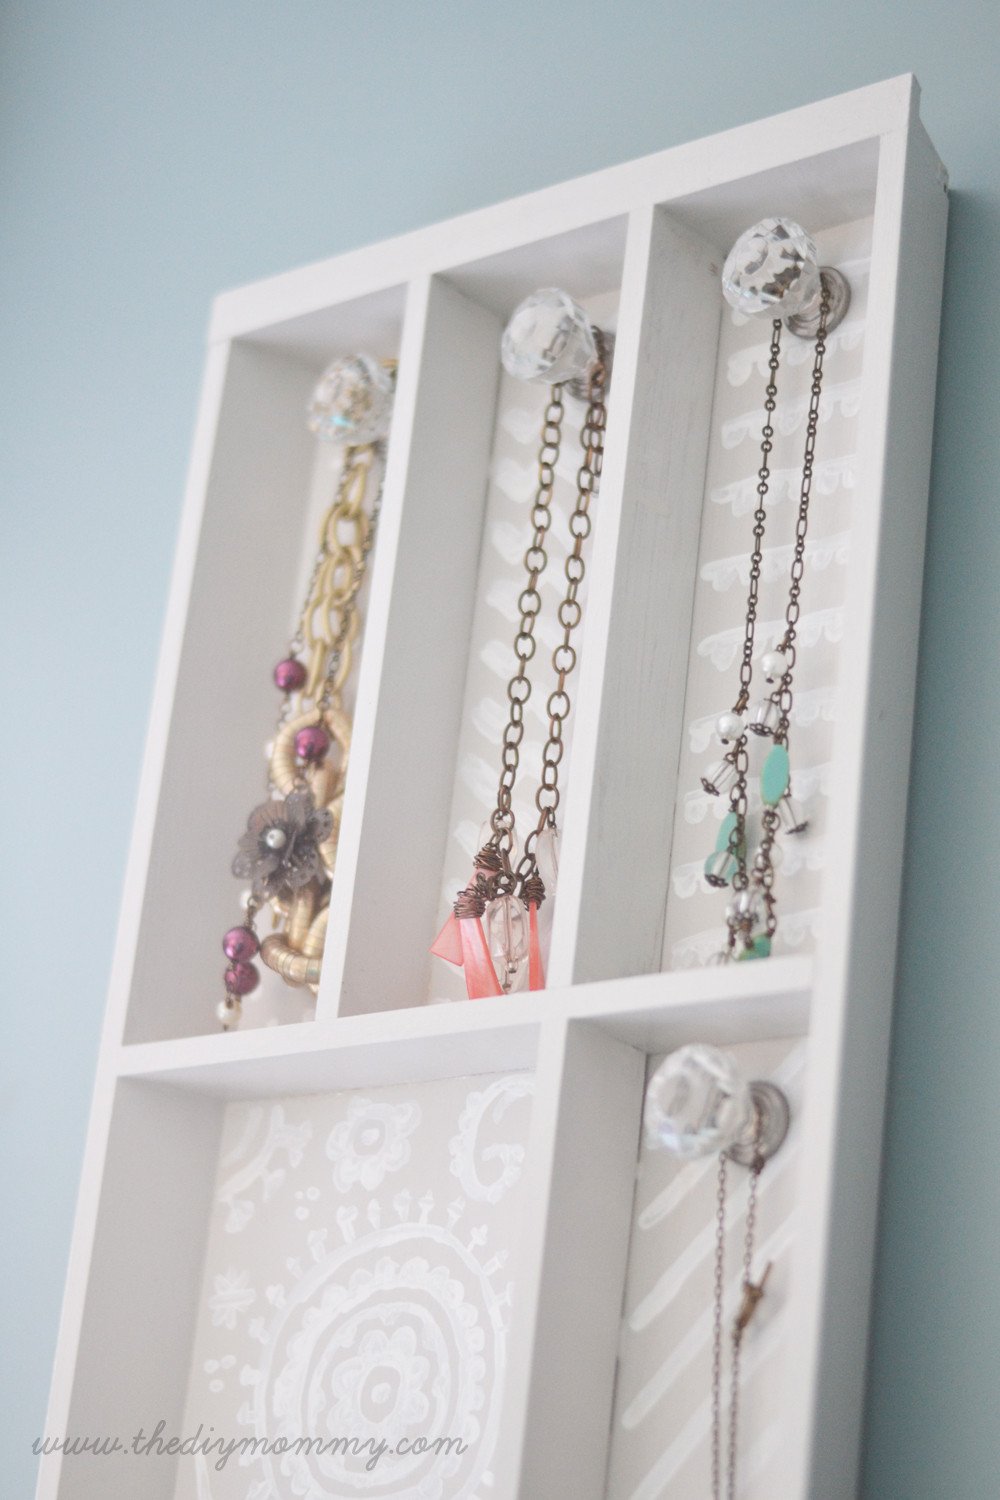 Necklace Organizer DIY
 Make a Jewelry Holder from a Cutlery Tray